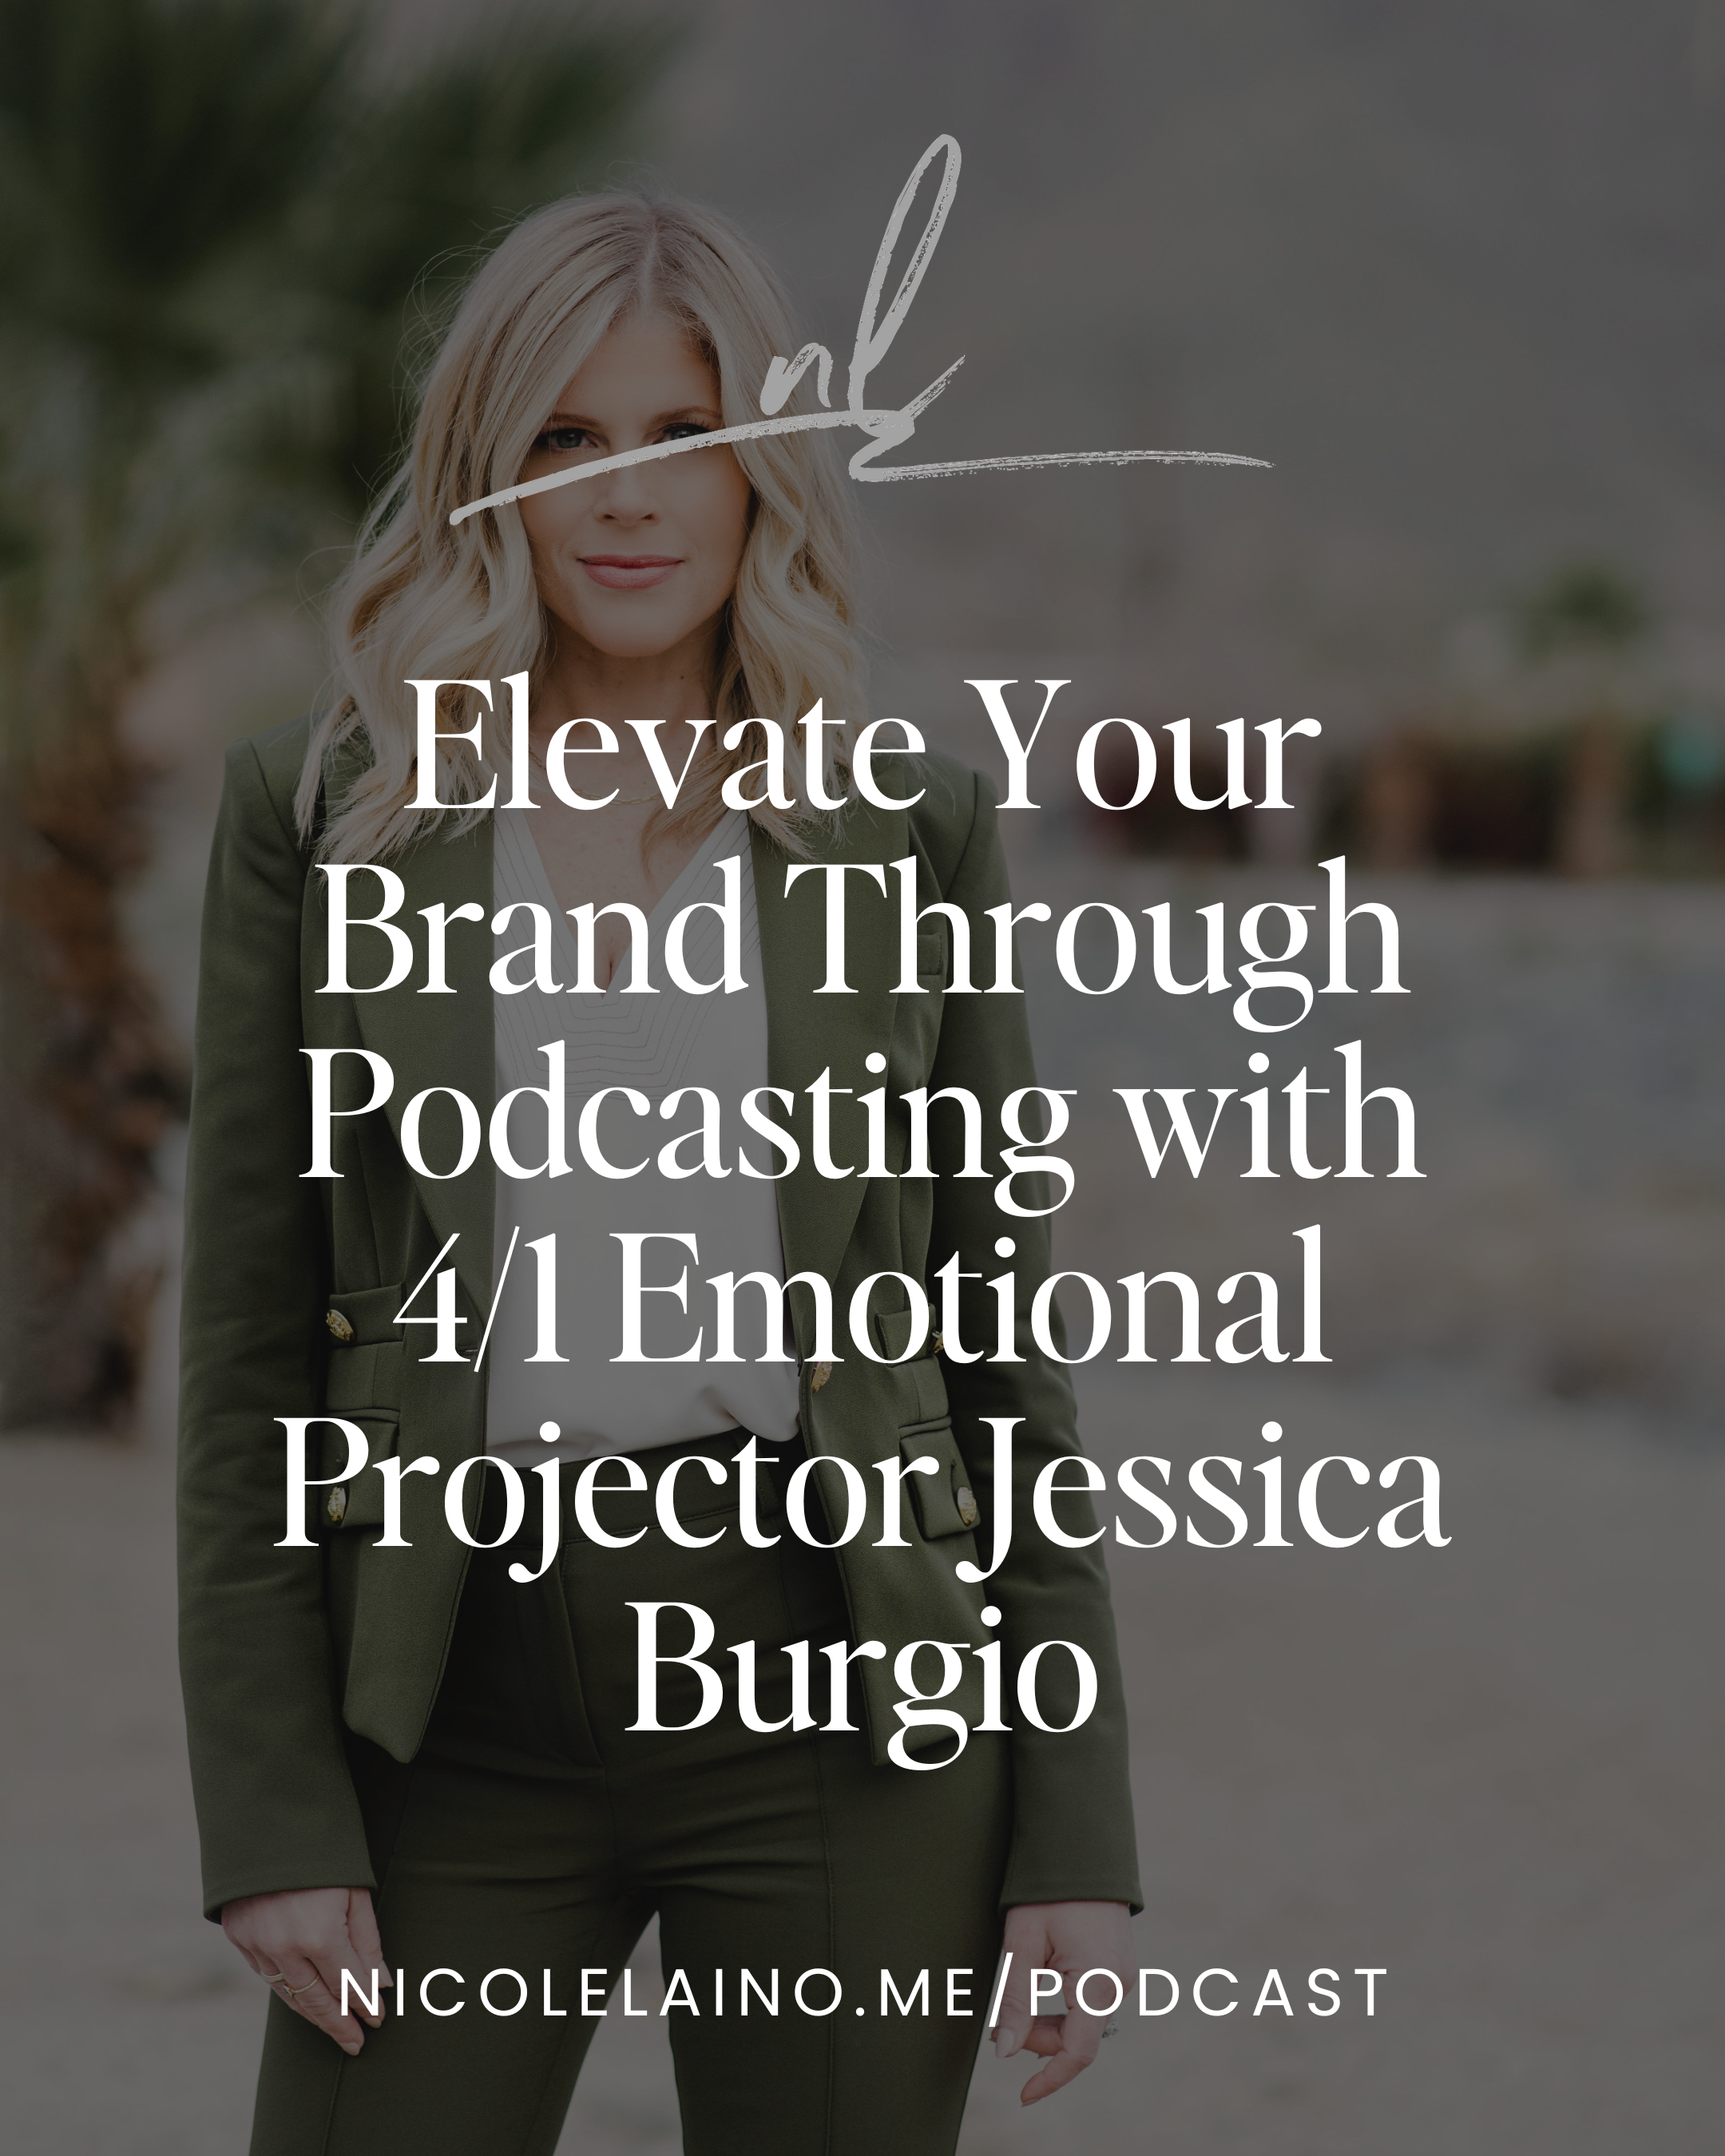 Elevate Your Brand Through Podcasting with 4/1 Emotional Projector Jessica Burgio